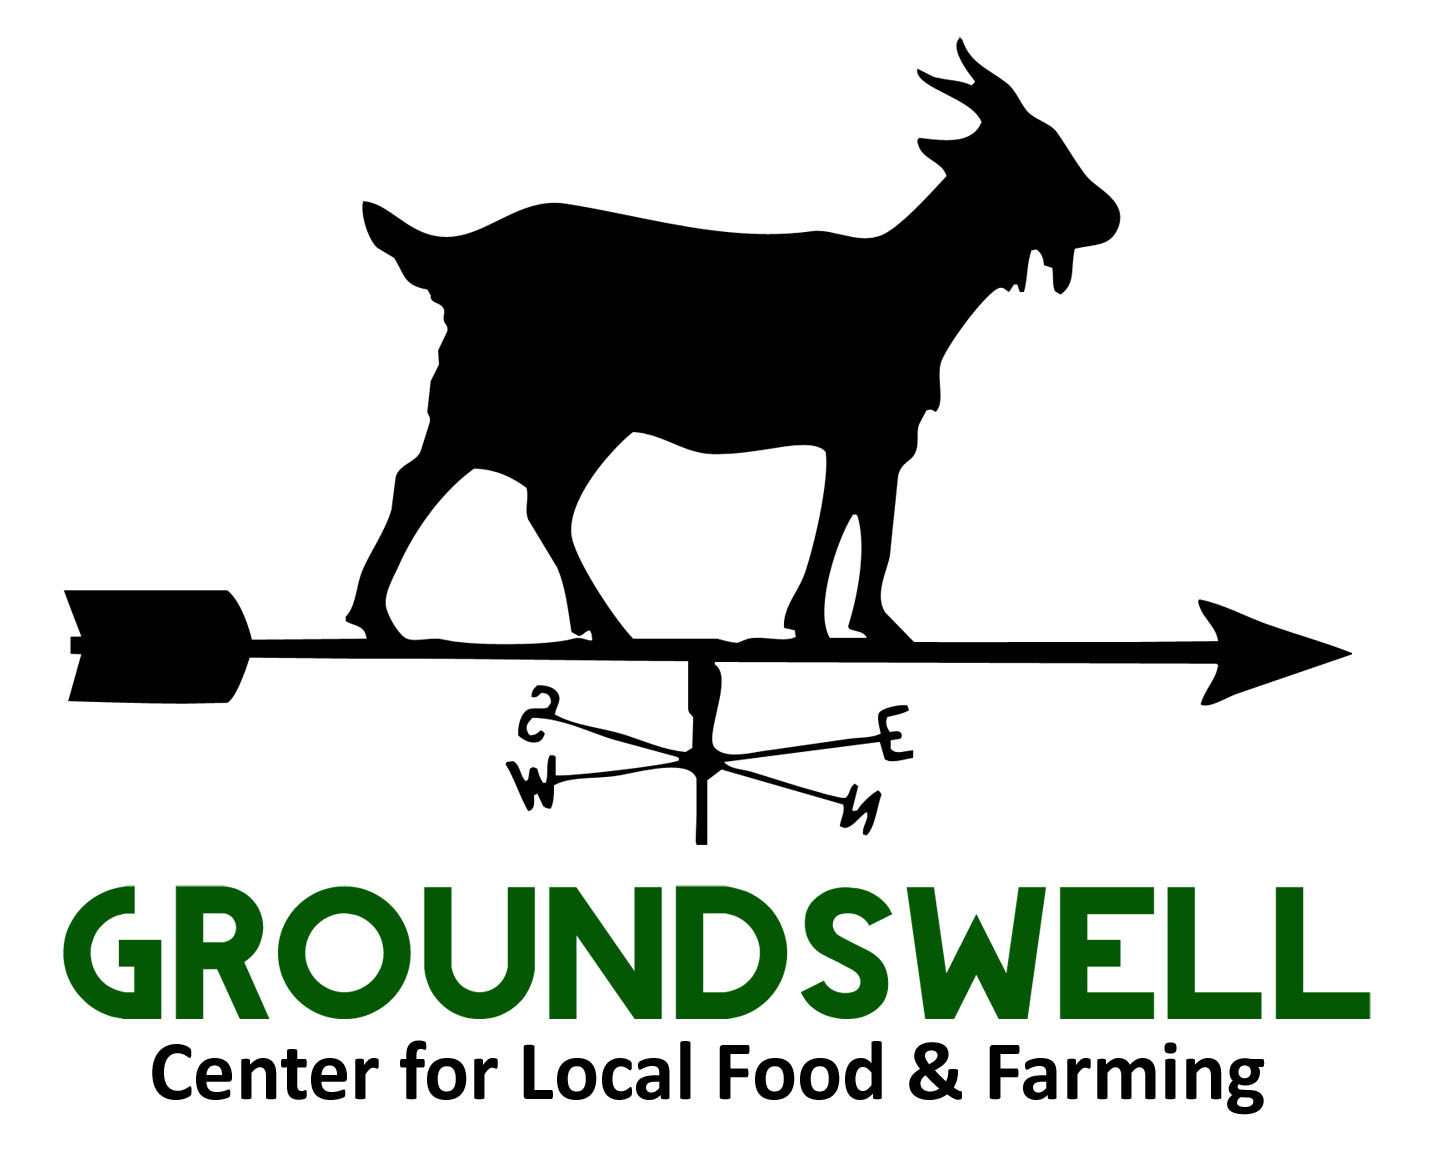 Groundswell Center for Local Food & Farming logo